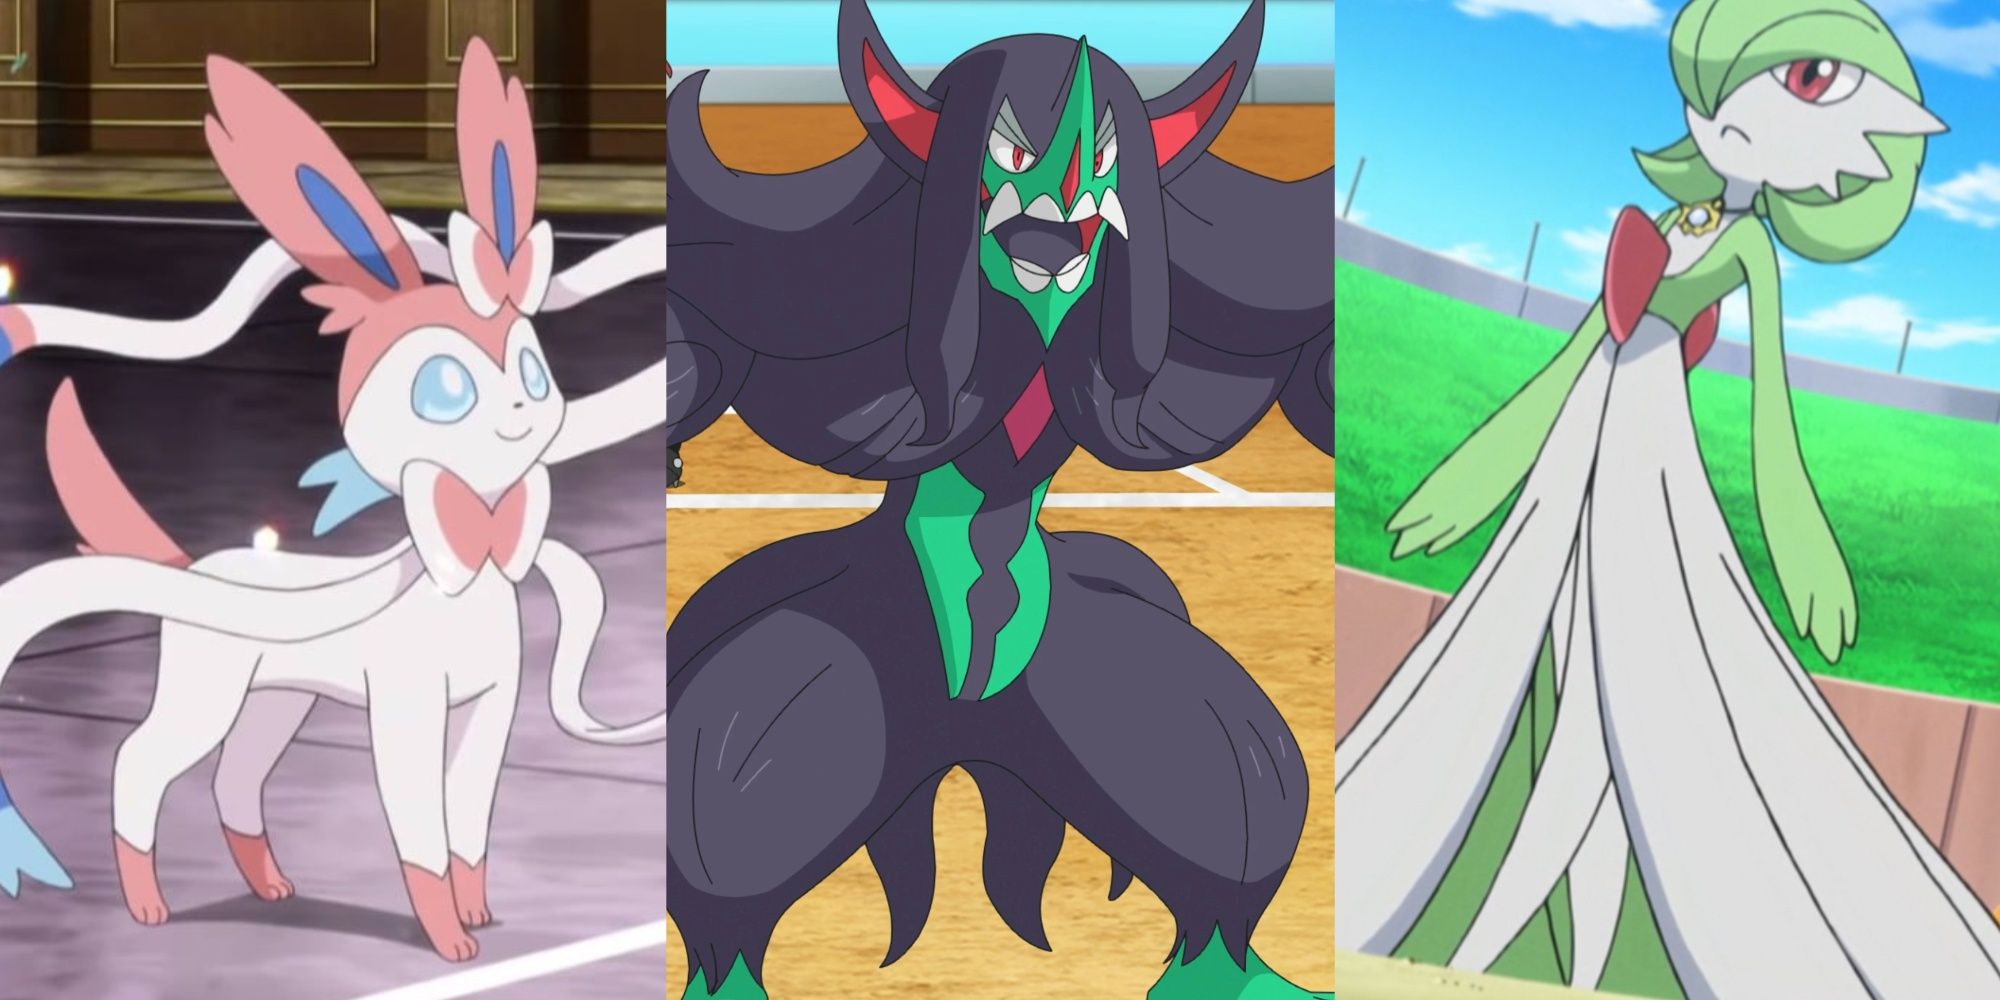 Sylveon, Grimmsnarl and Gardevoir, all make it on this list